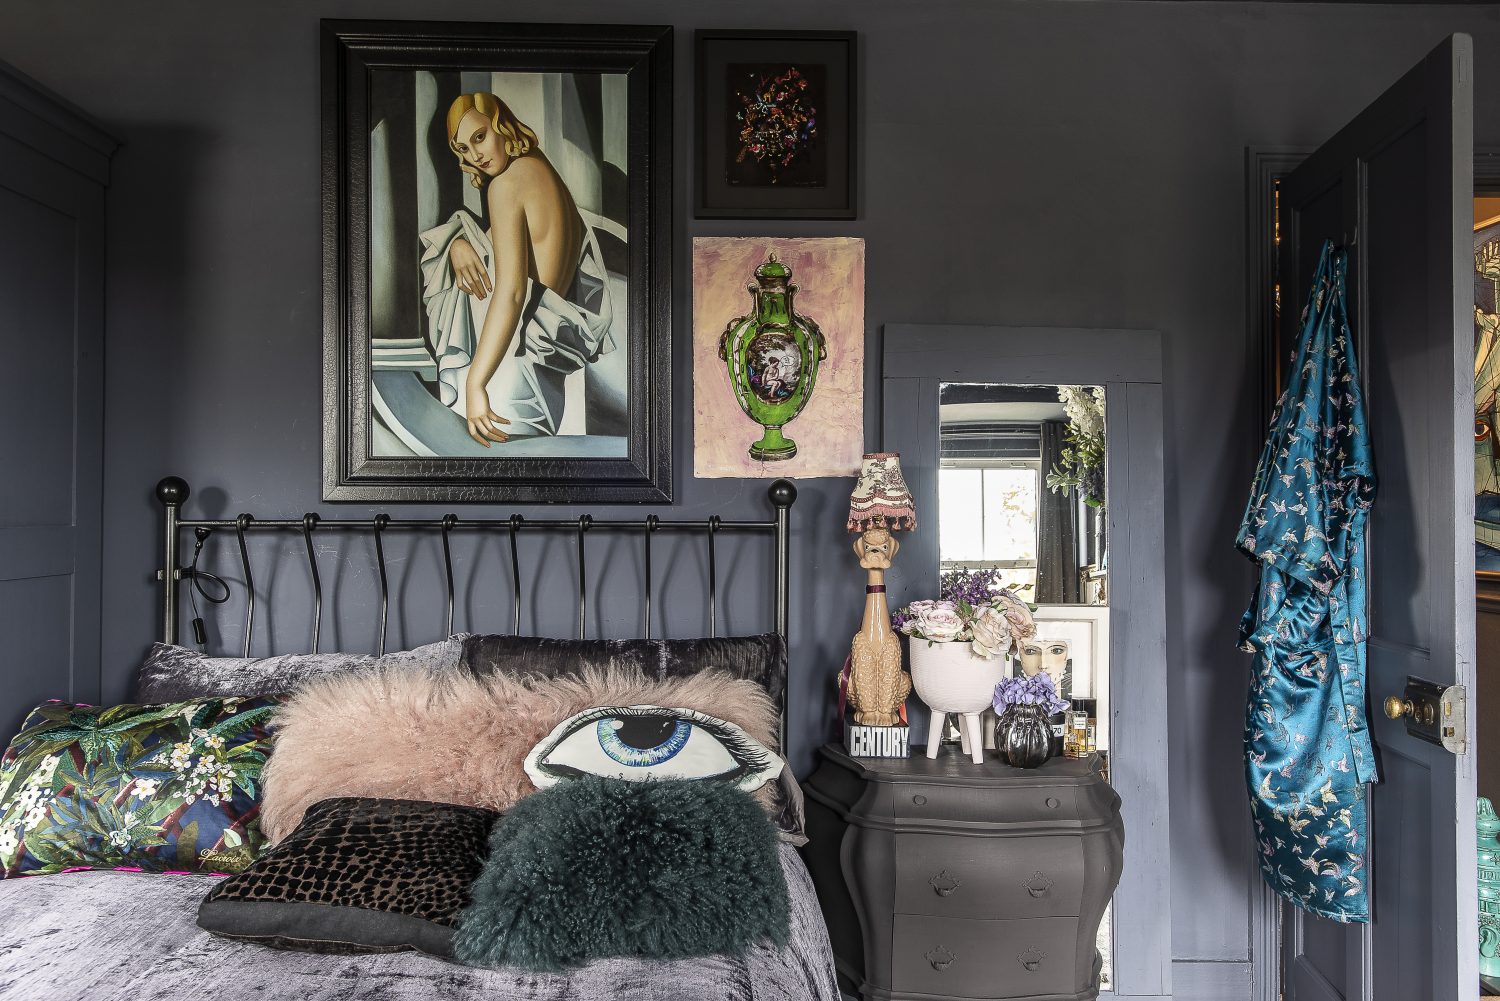 Pinks, greens and blues picked out in the artworks are matched by soft furnishings. Wallpaper printed with ornate panelling on one wall by Rockett St George breaks up the deep grey used to paint the walls, ceiling, wardrobe and door giving an illusion of ‘relief’